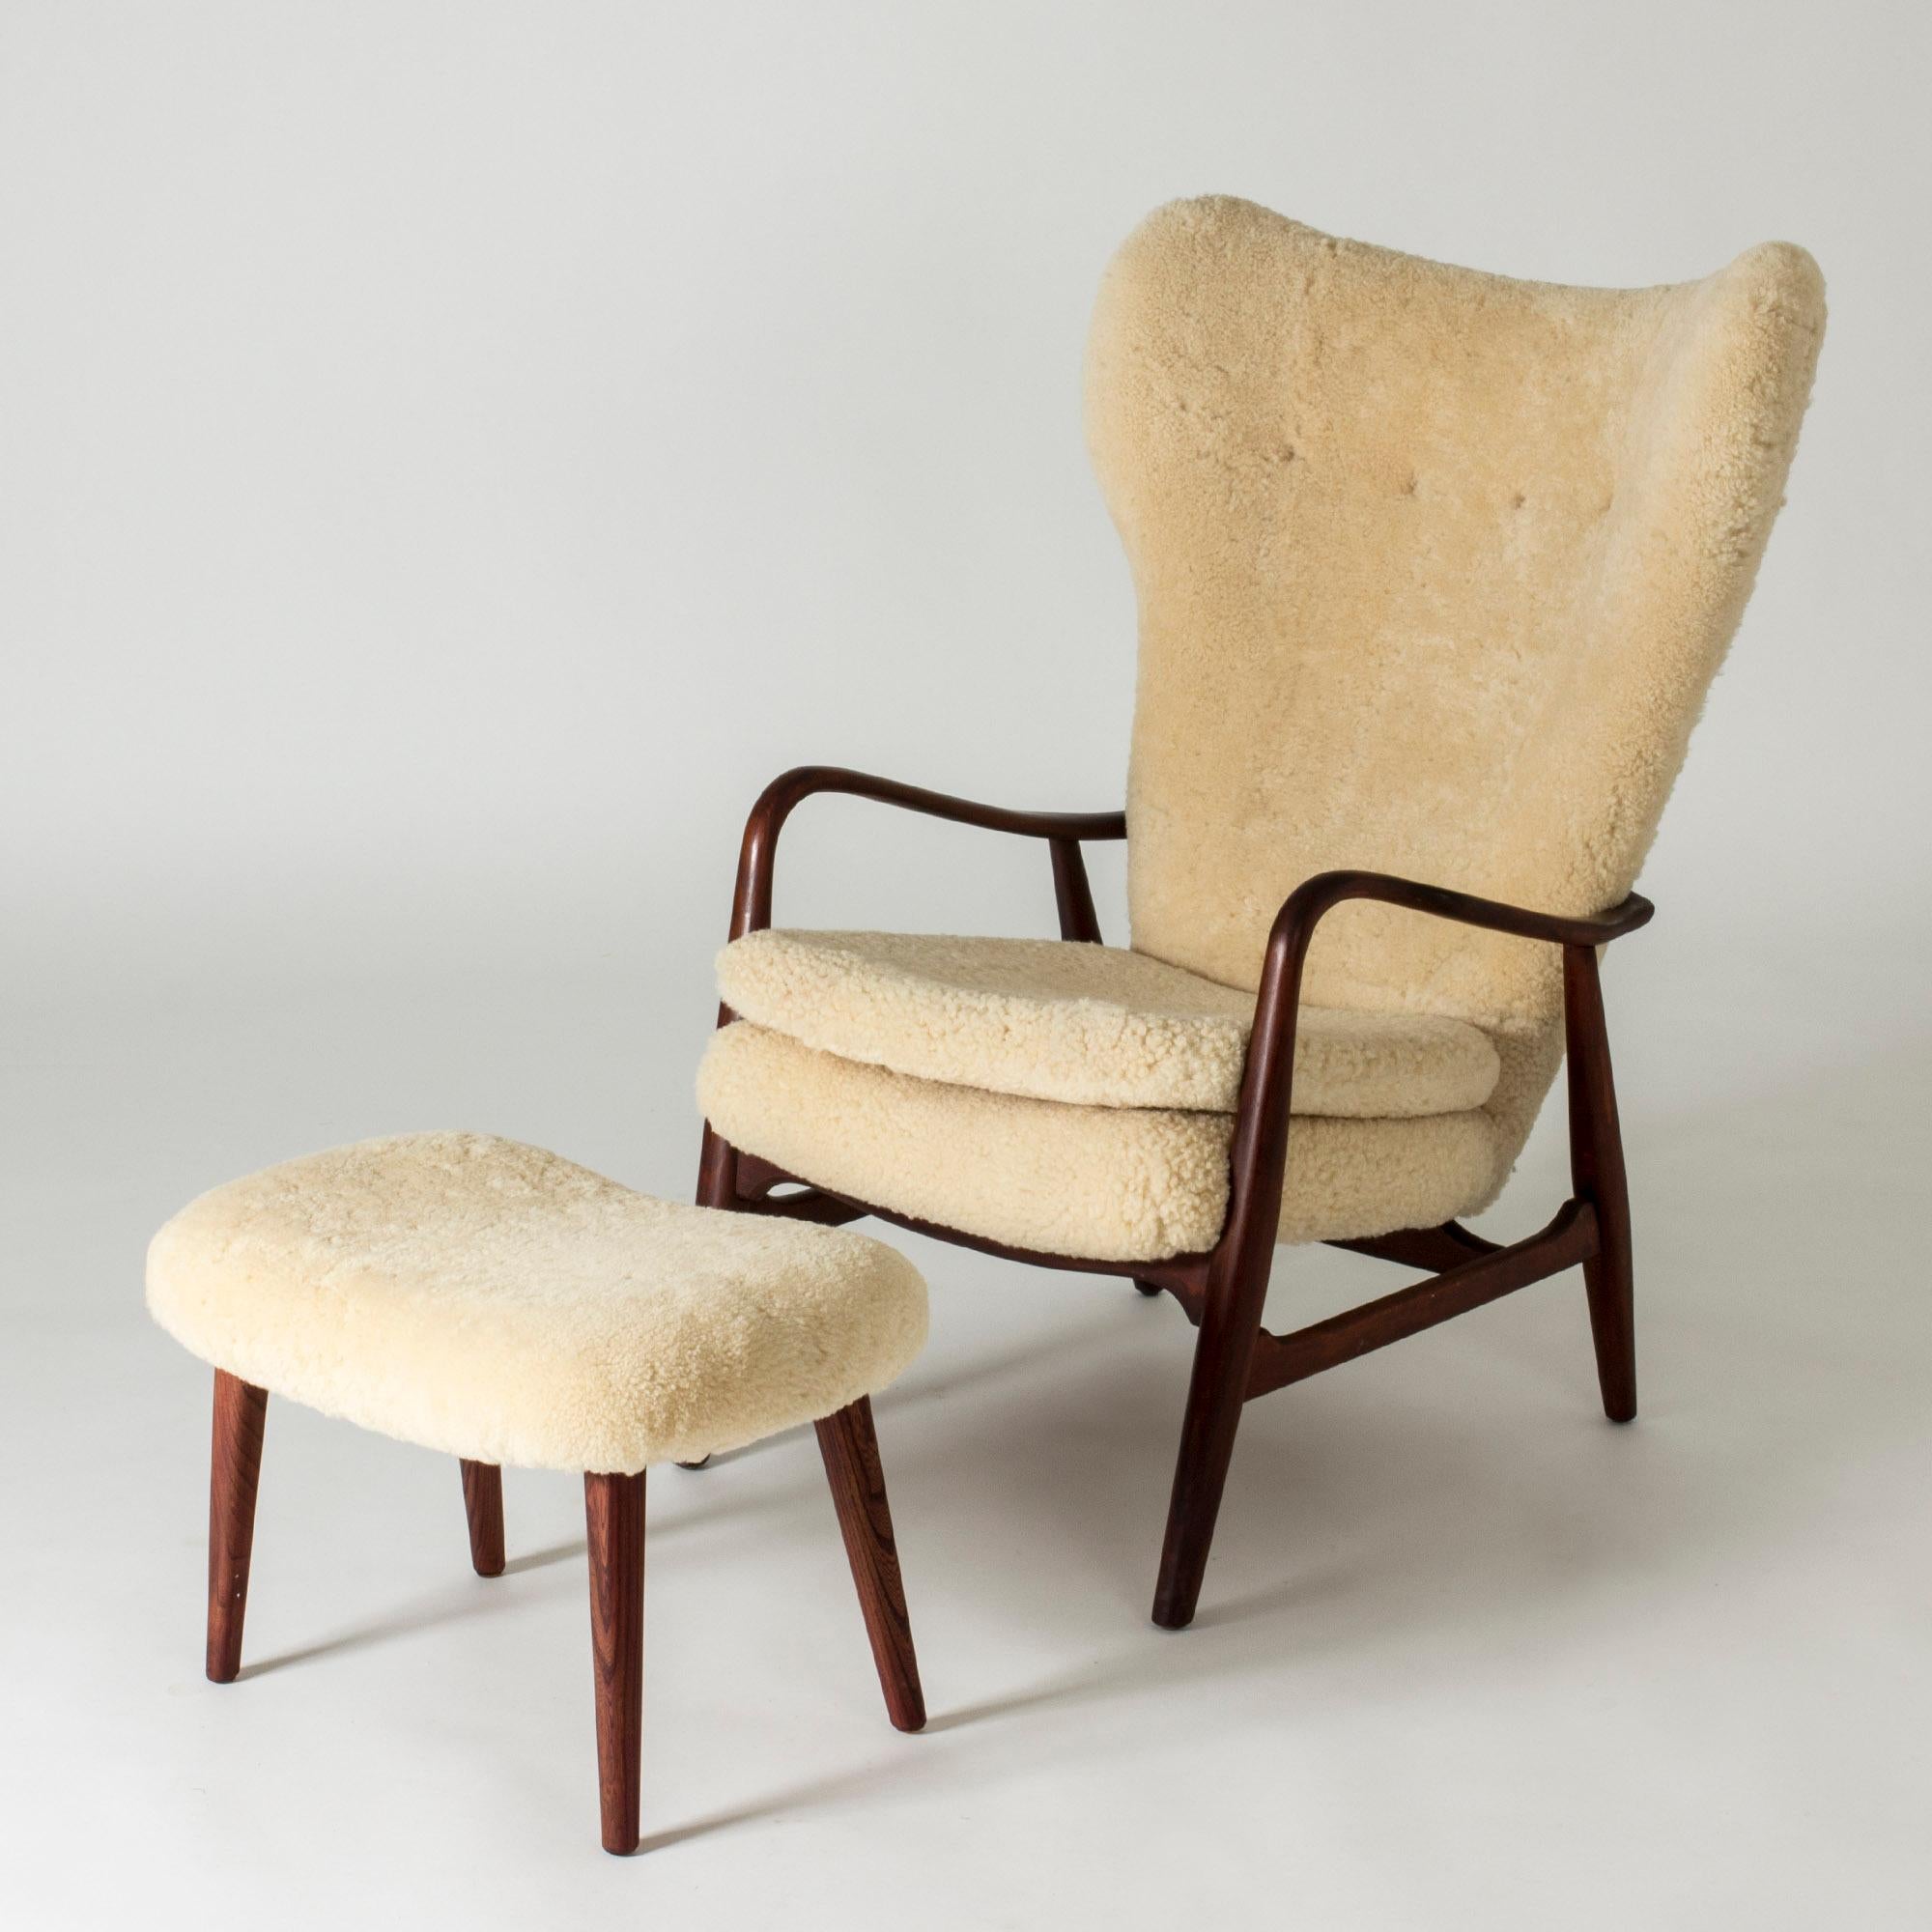 Elegant lounge chair and footstool by Ib Madsen and Acton Schubell, made from rosewood with sheepskin upholstery. Generous size and beautiful wooden details, like the armrests encircling the back.